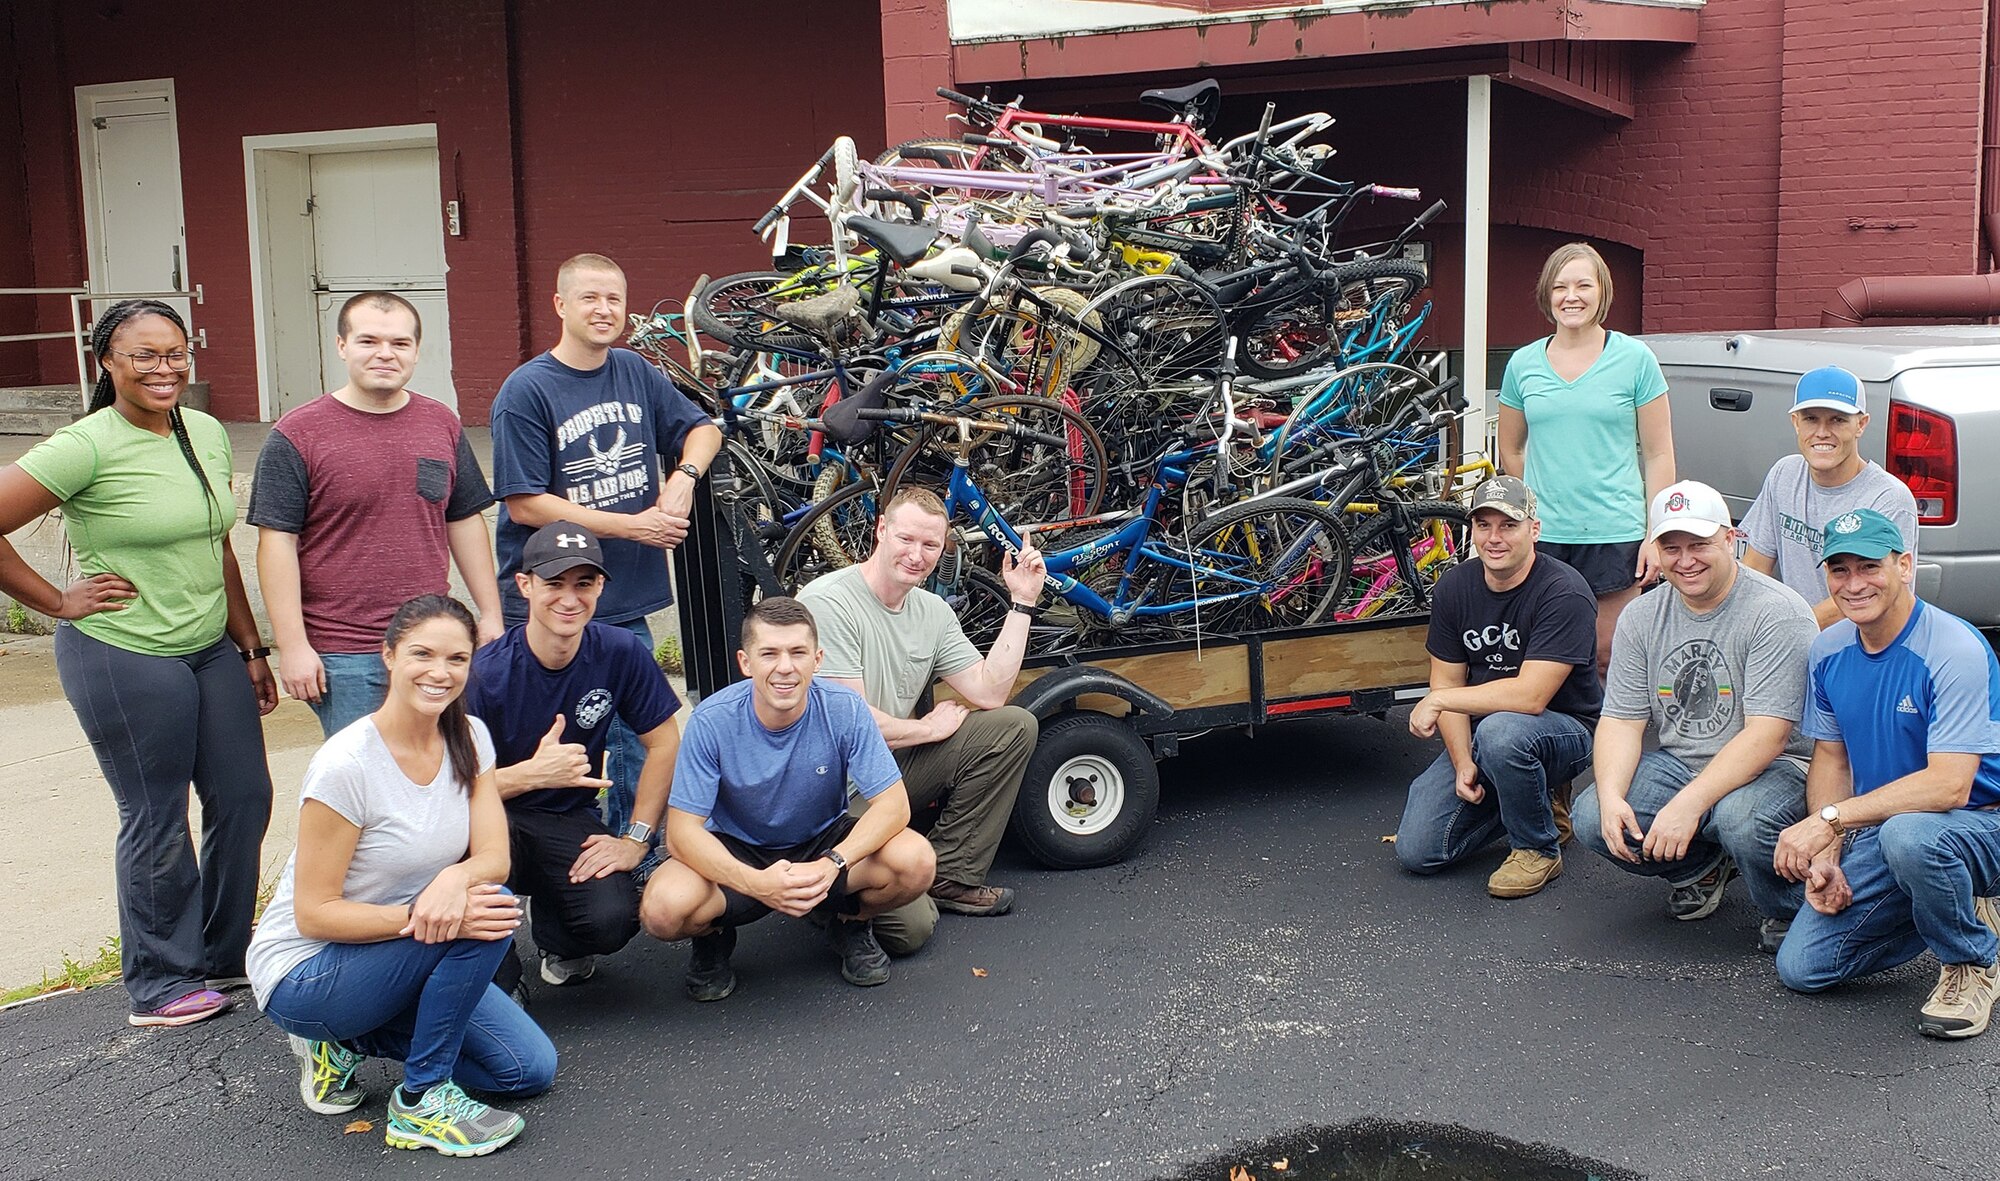 Members of the 655th Intelligence, Surveillance and Reconnaissance Group’s, 14th Intelligence Squadron, proudly pose after loading 1,400 pounds of scrap bicycle materials at Bicycles for All, Dayton, Ohio, July 20, 2018.